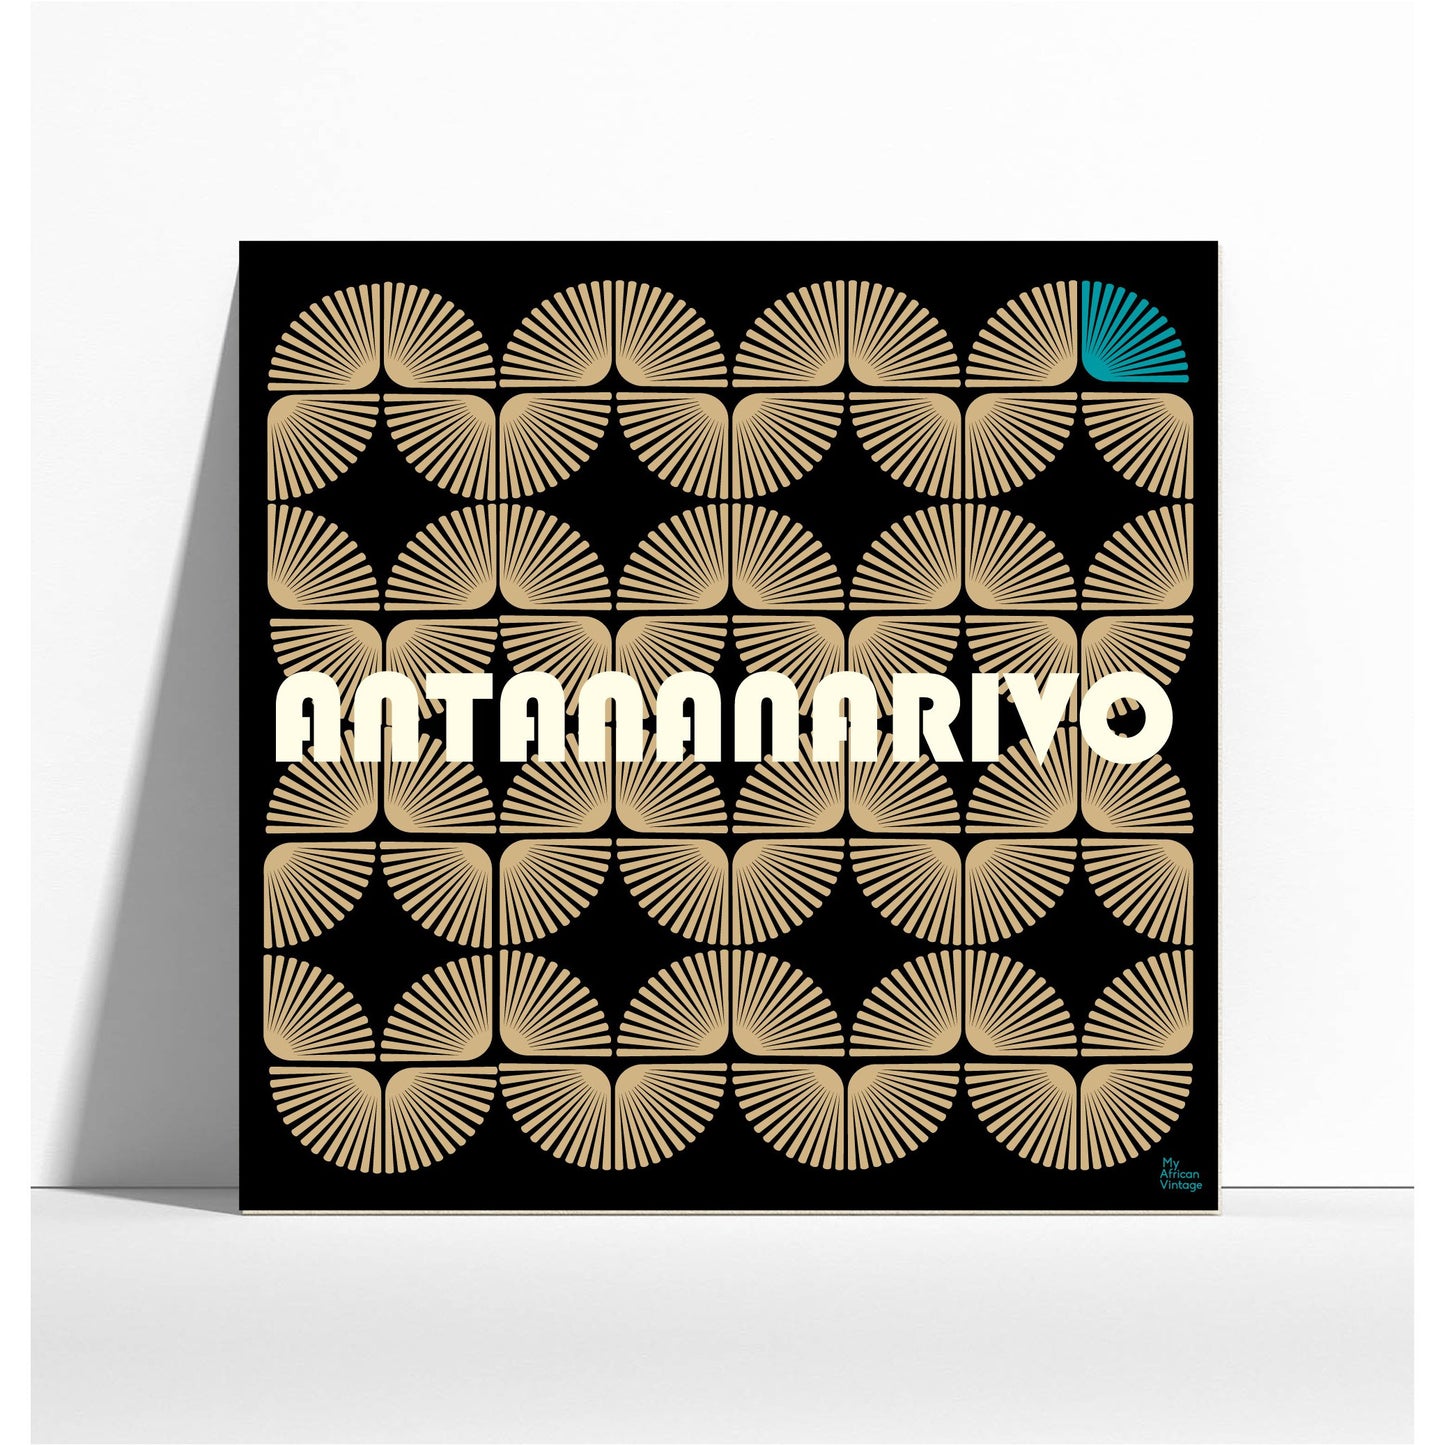 "Antananarivo" retro style poster  - "My African Vintage" collection